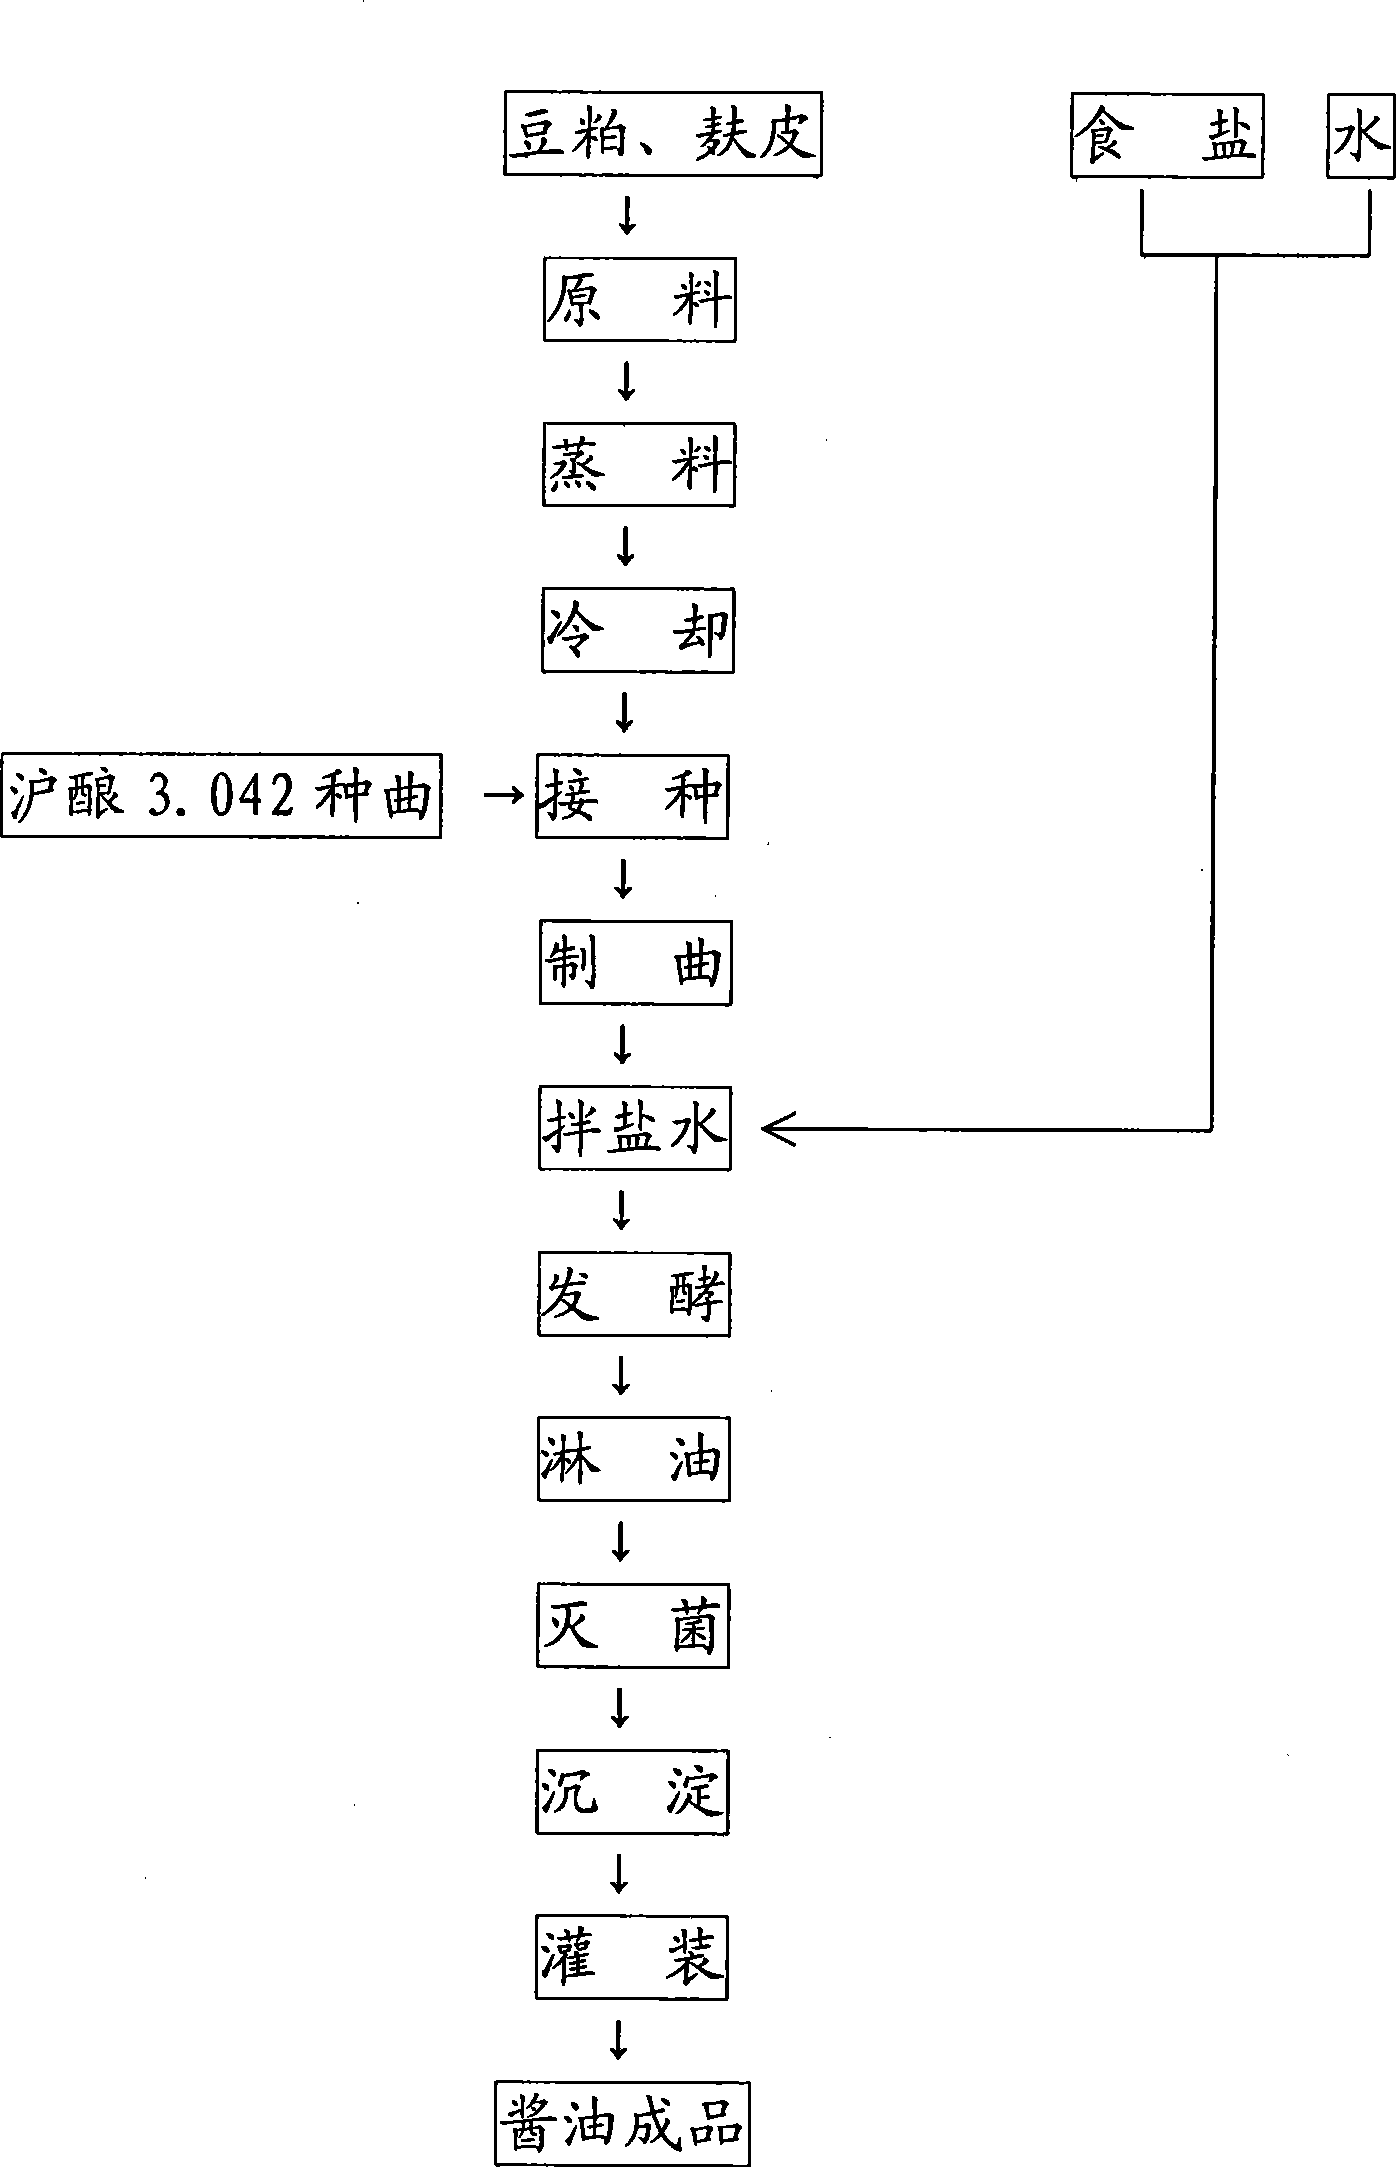 Production method of soy sauce